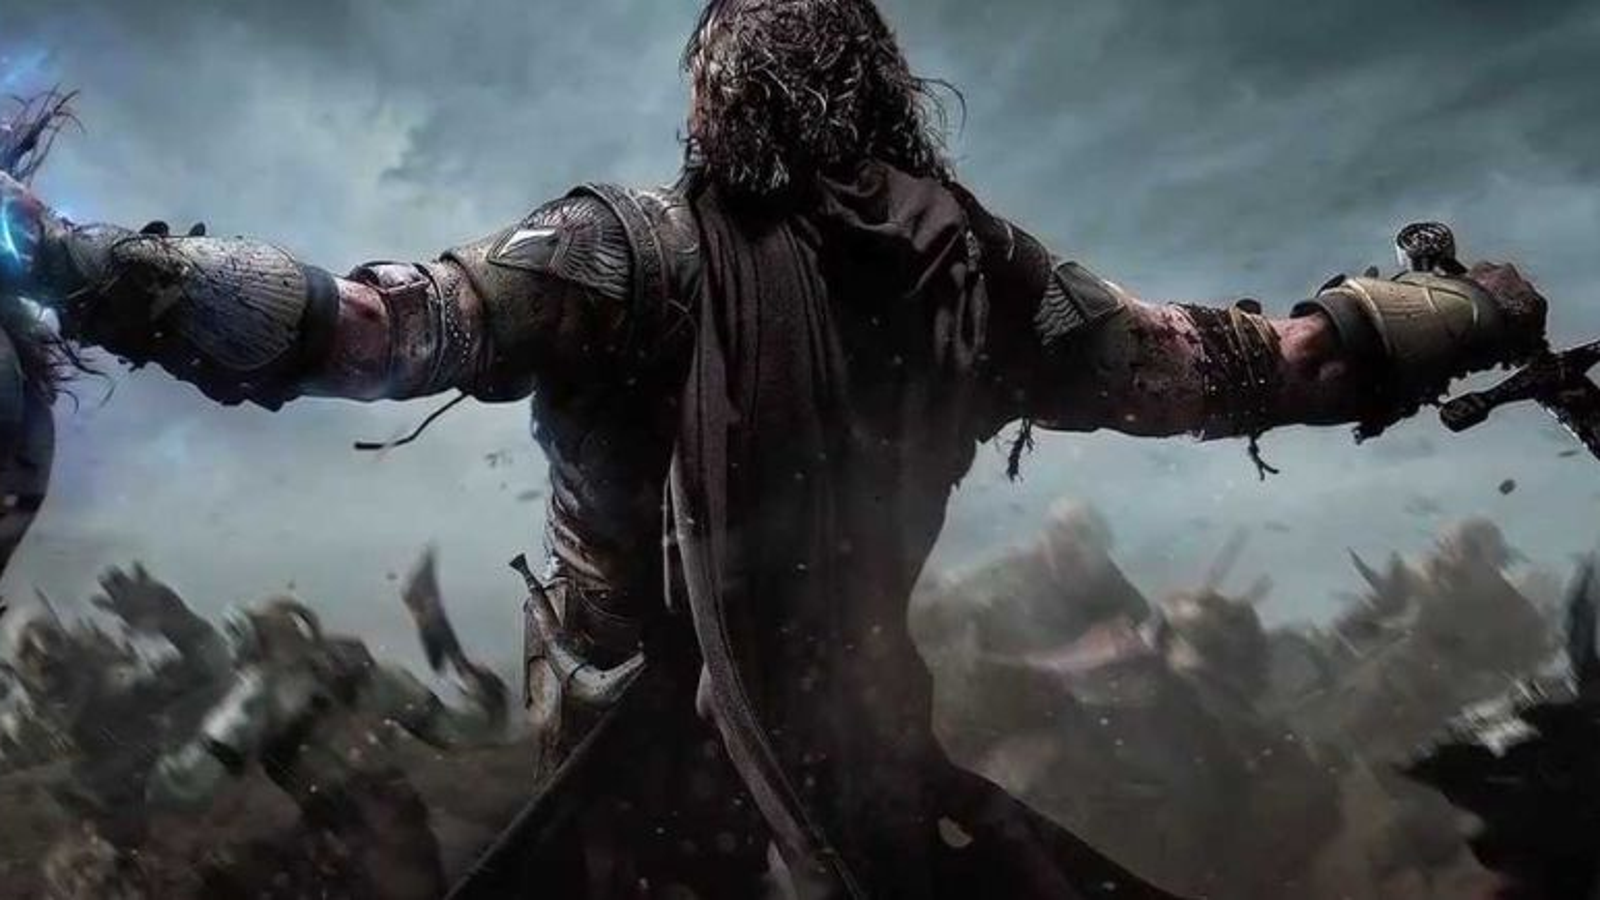 Shadow of mordor game